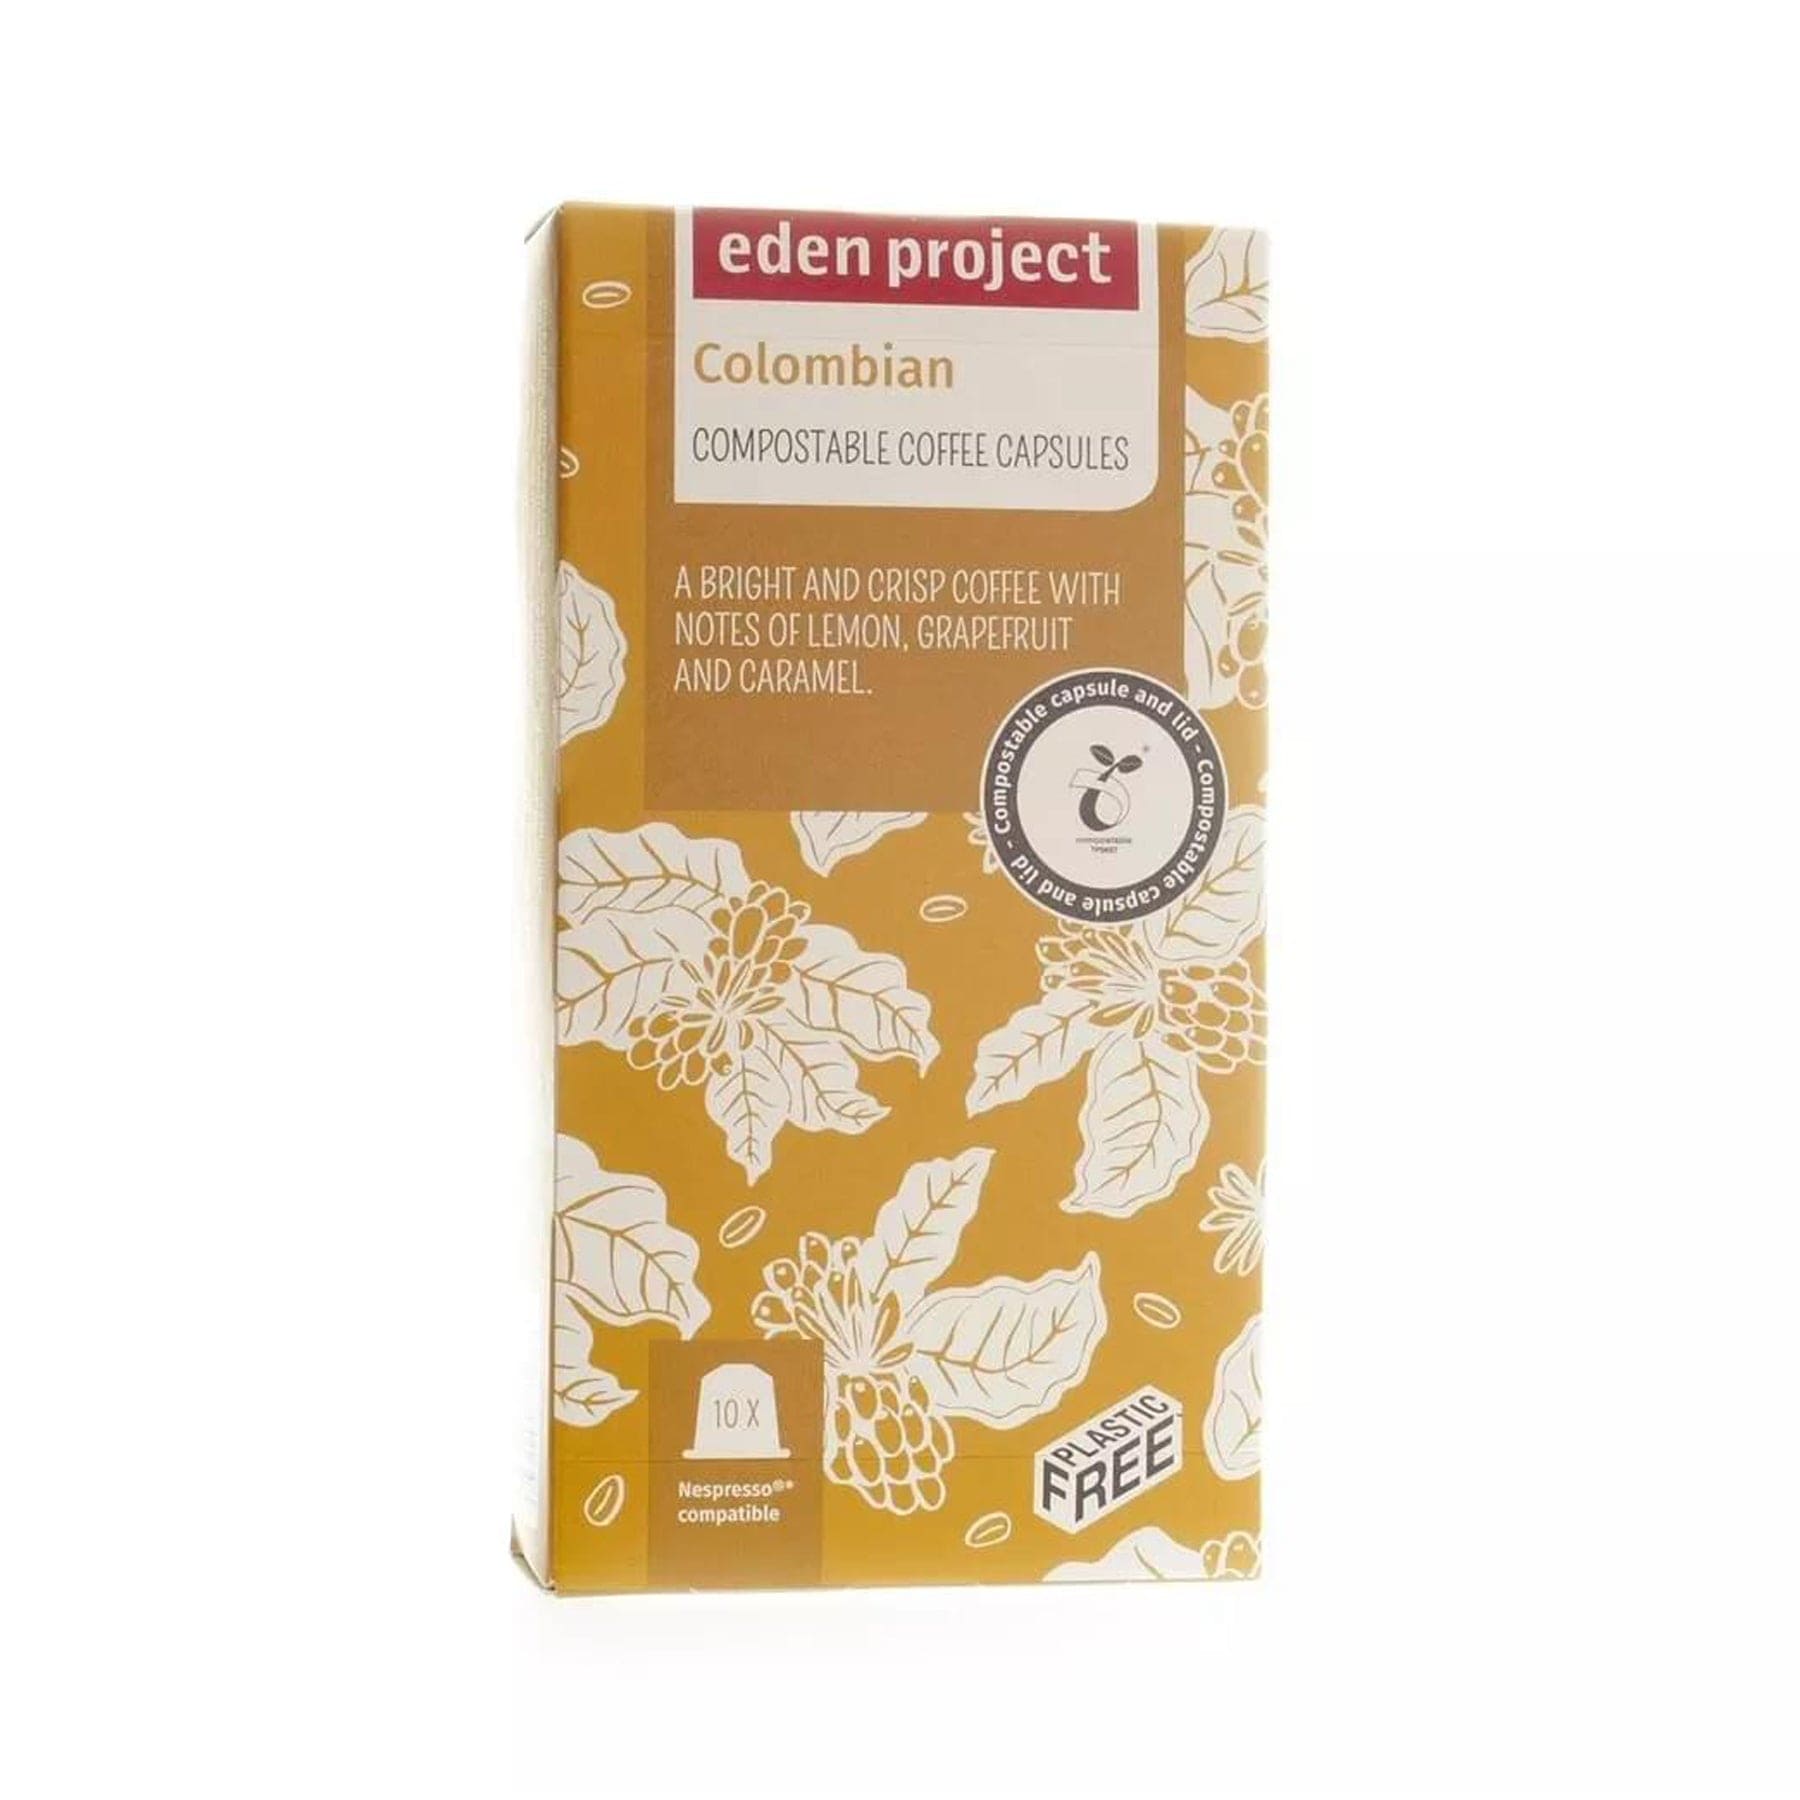 Eden Project Colombian compostable coffee capsules packaging with floral design, notes of lemon, grapefruit, and caramel, Nespresso compatible, plastic-free label.